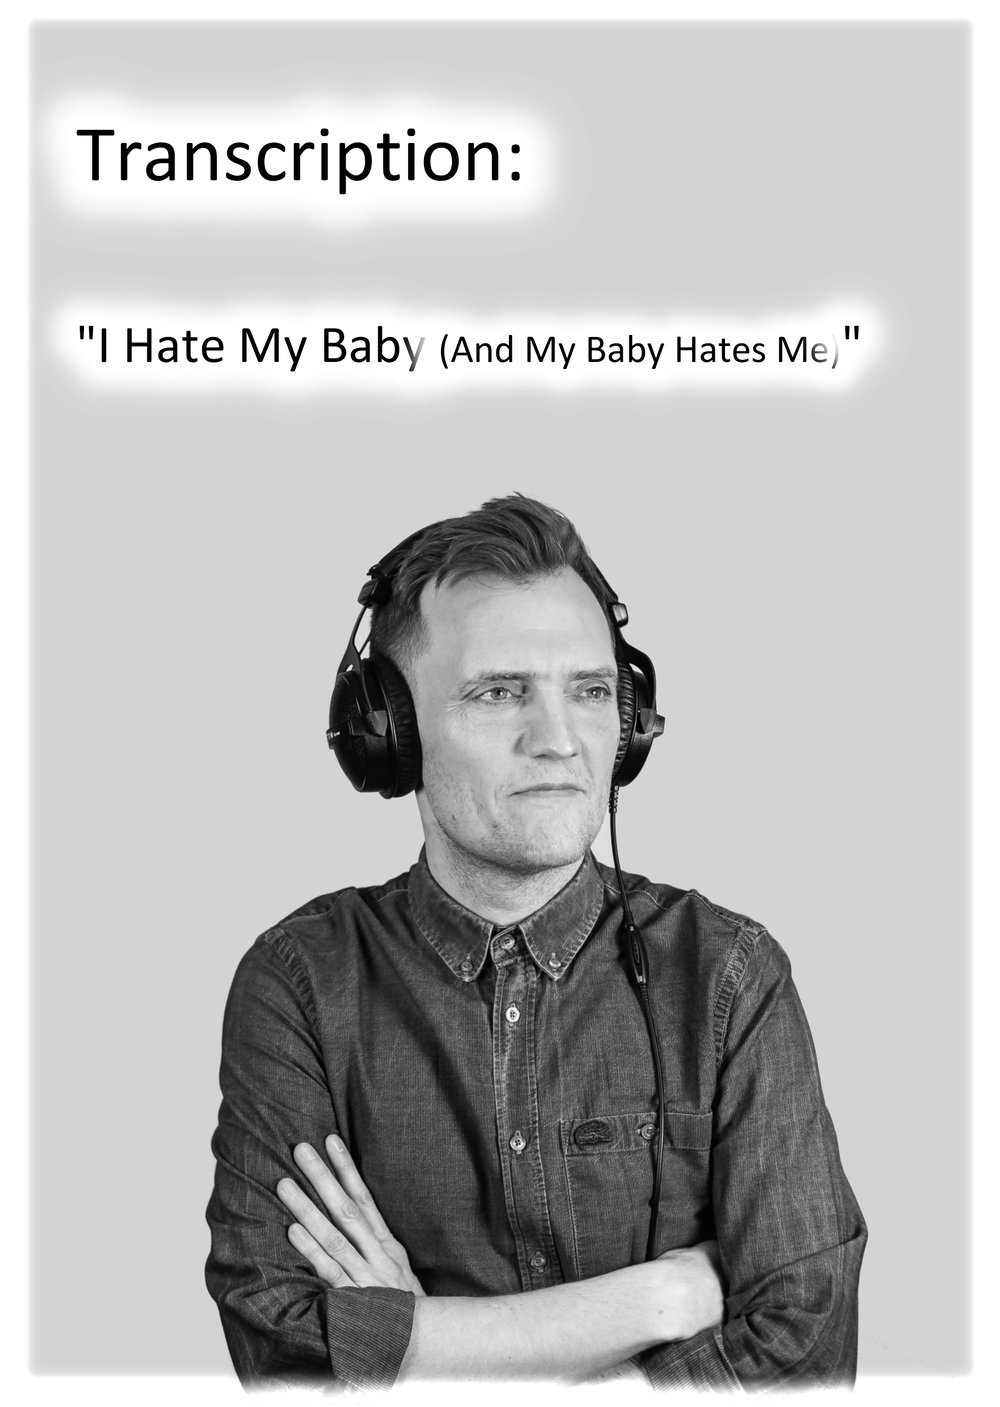 Image of Transcription: "I Hate My Baby (And My Baby Hates Me)"